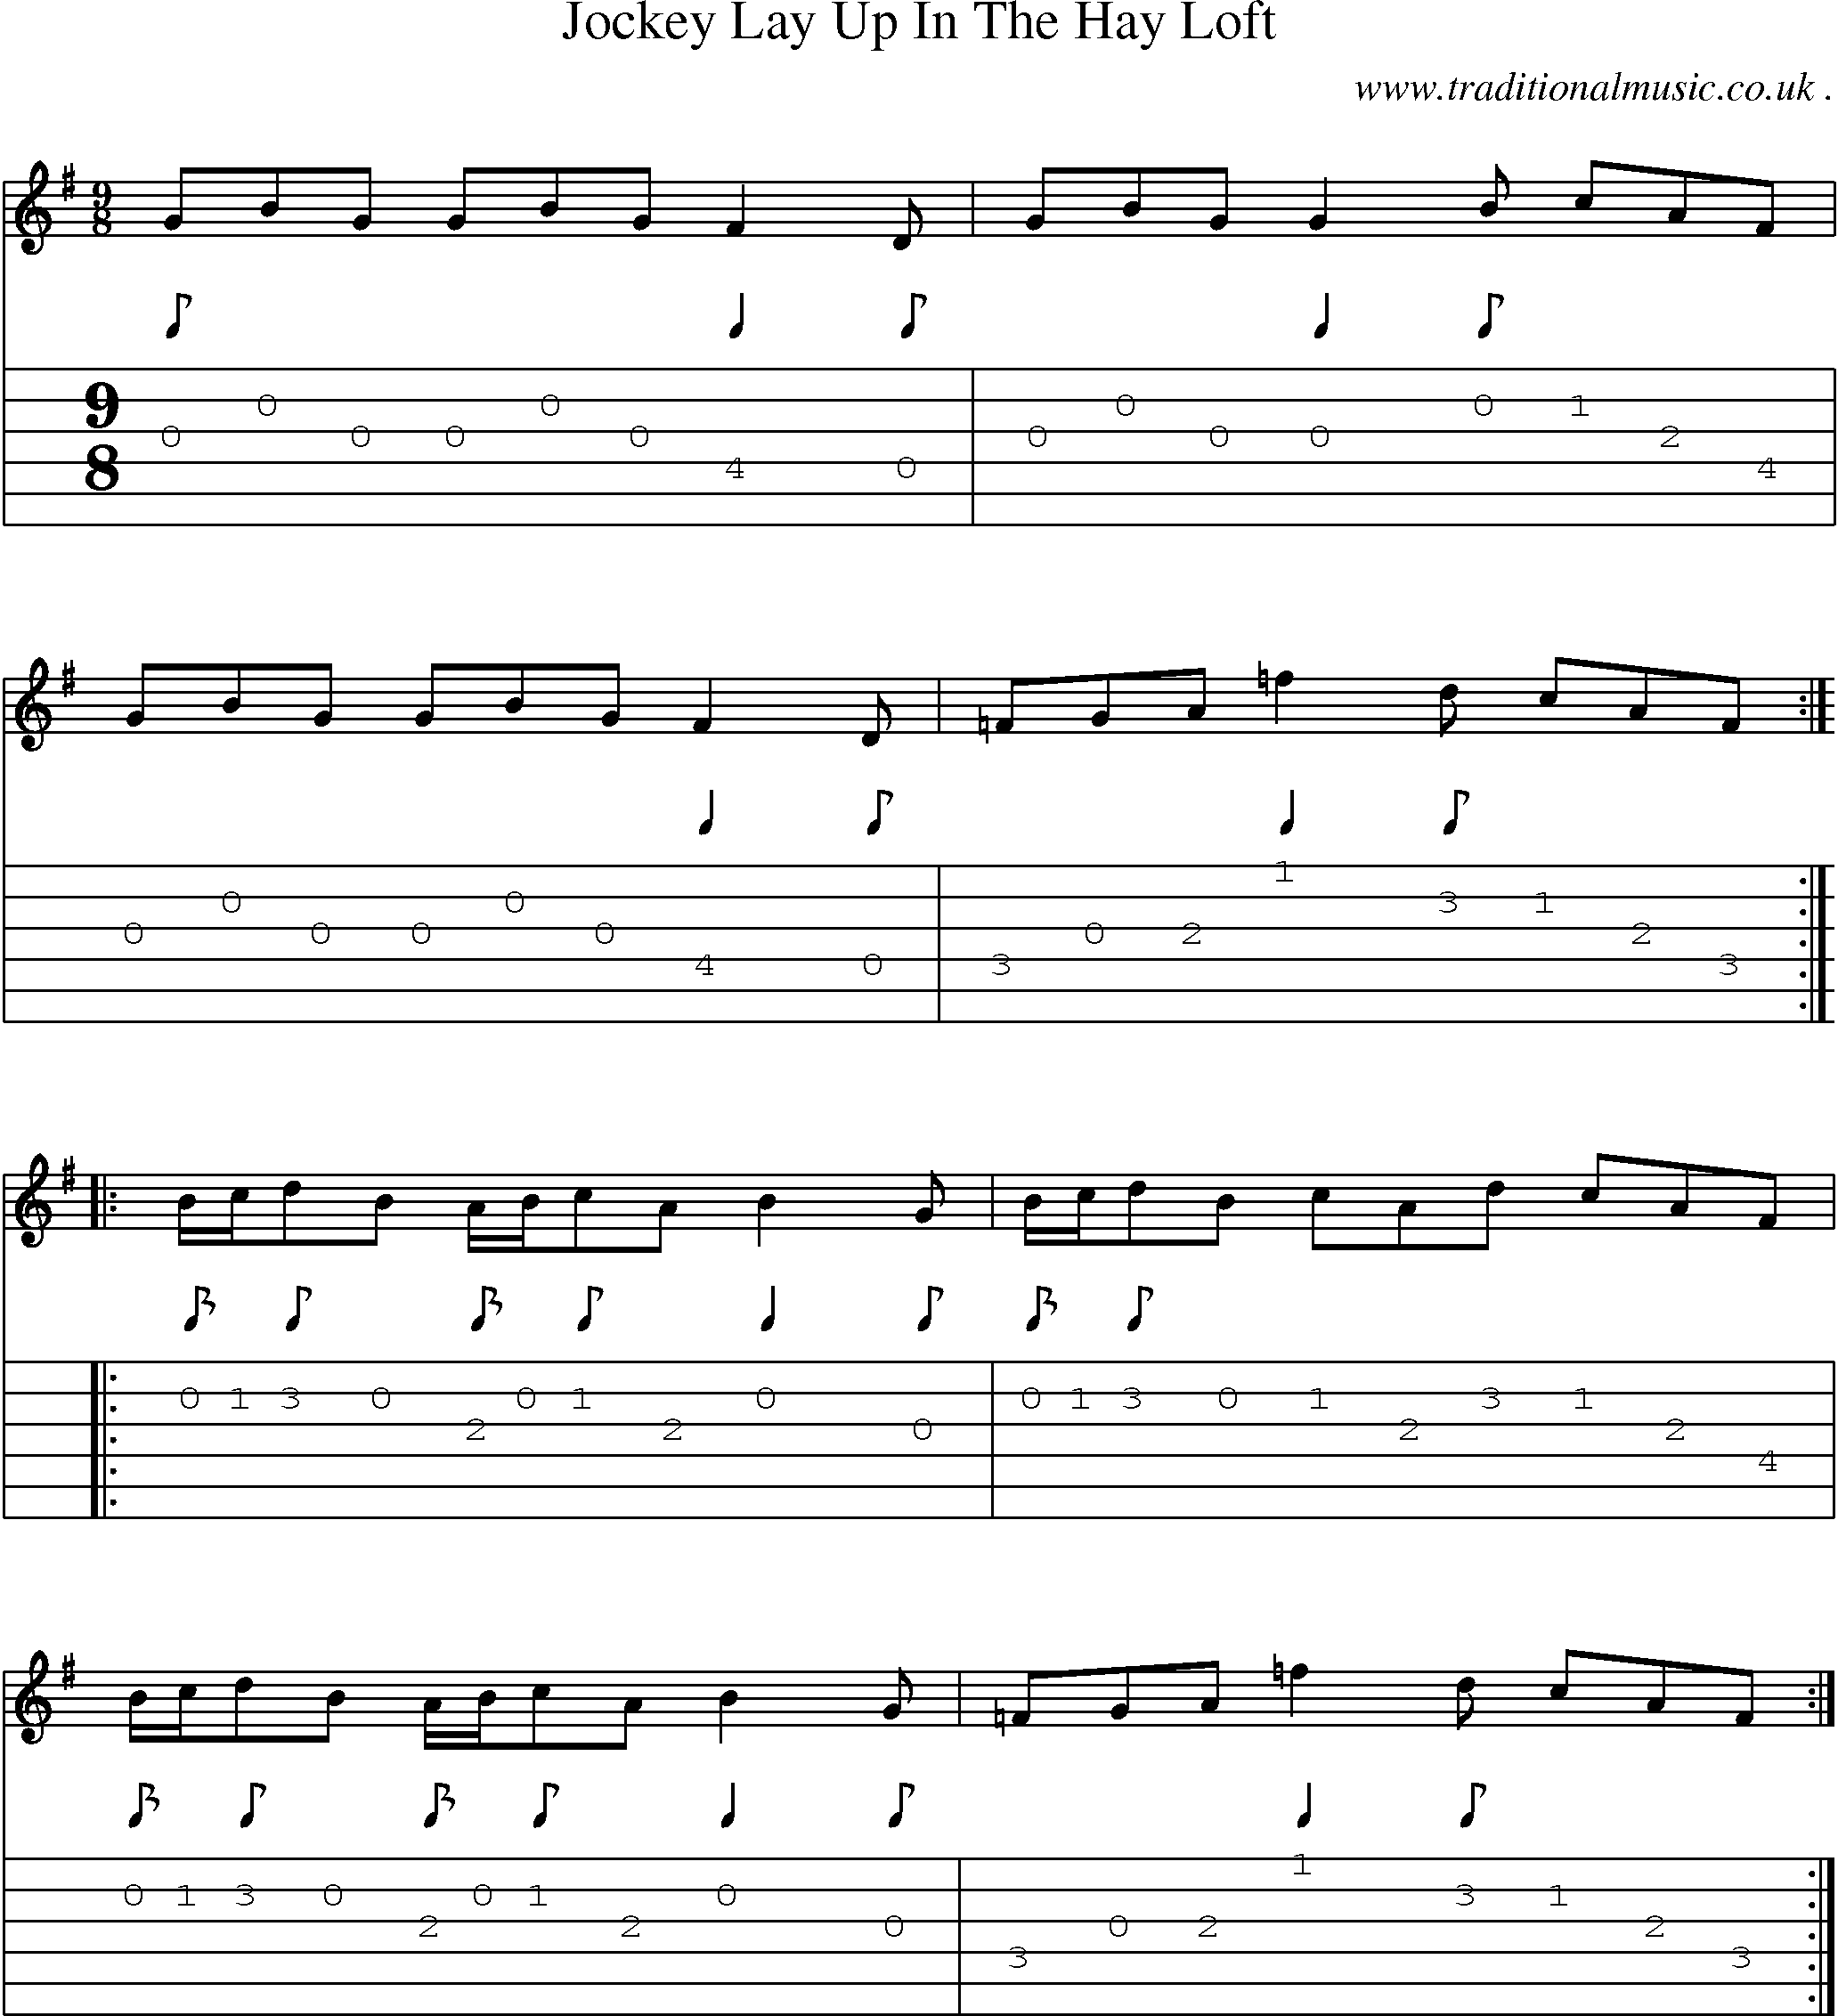 Sheet-Music and Guitar Tabs for Jockey Lay Up In The Hay Loft